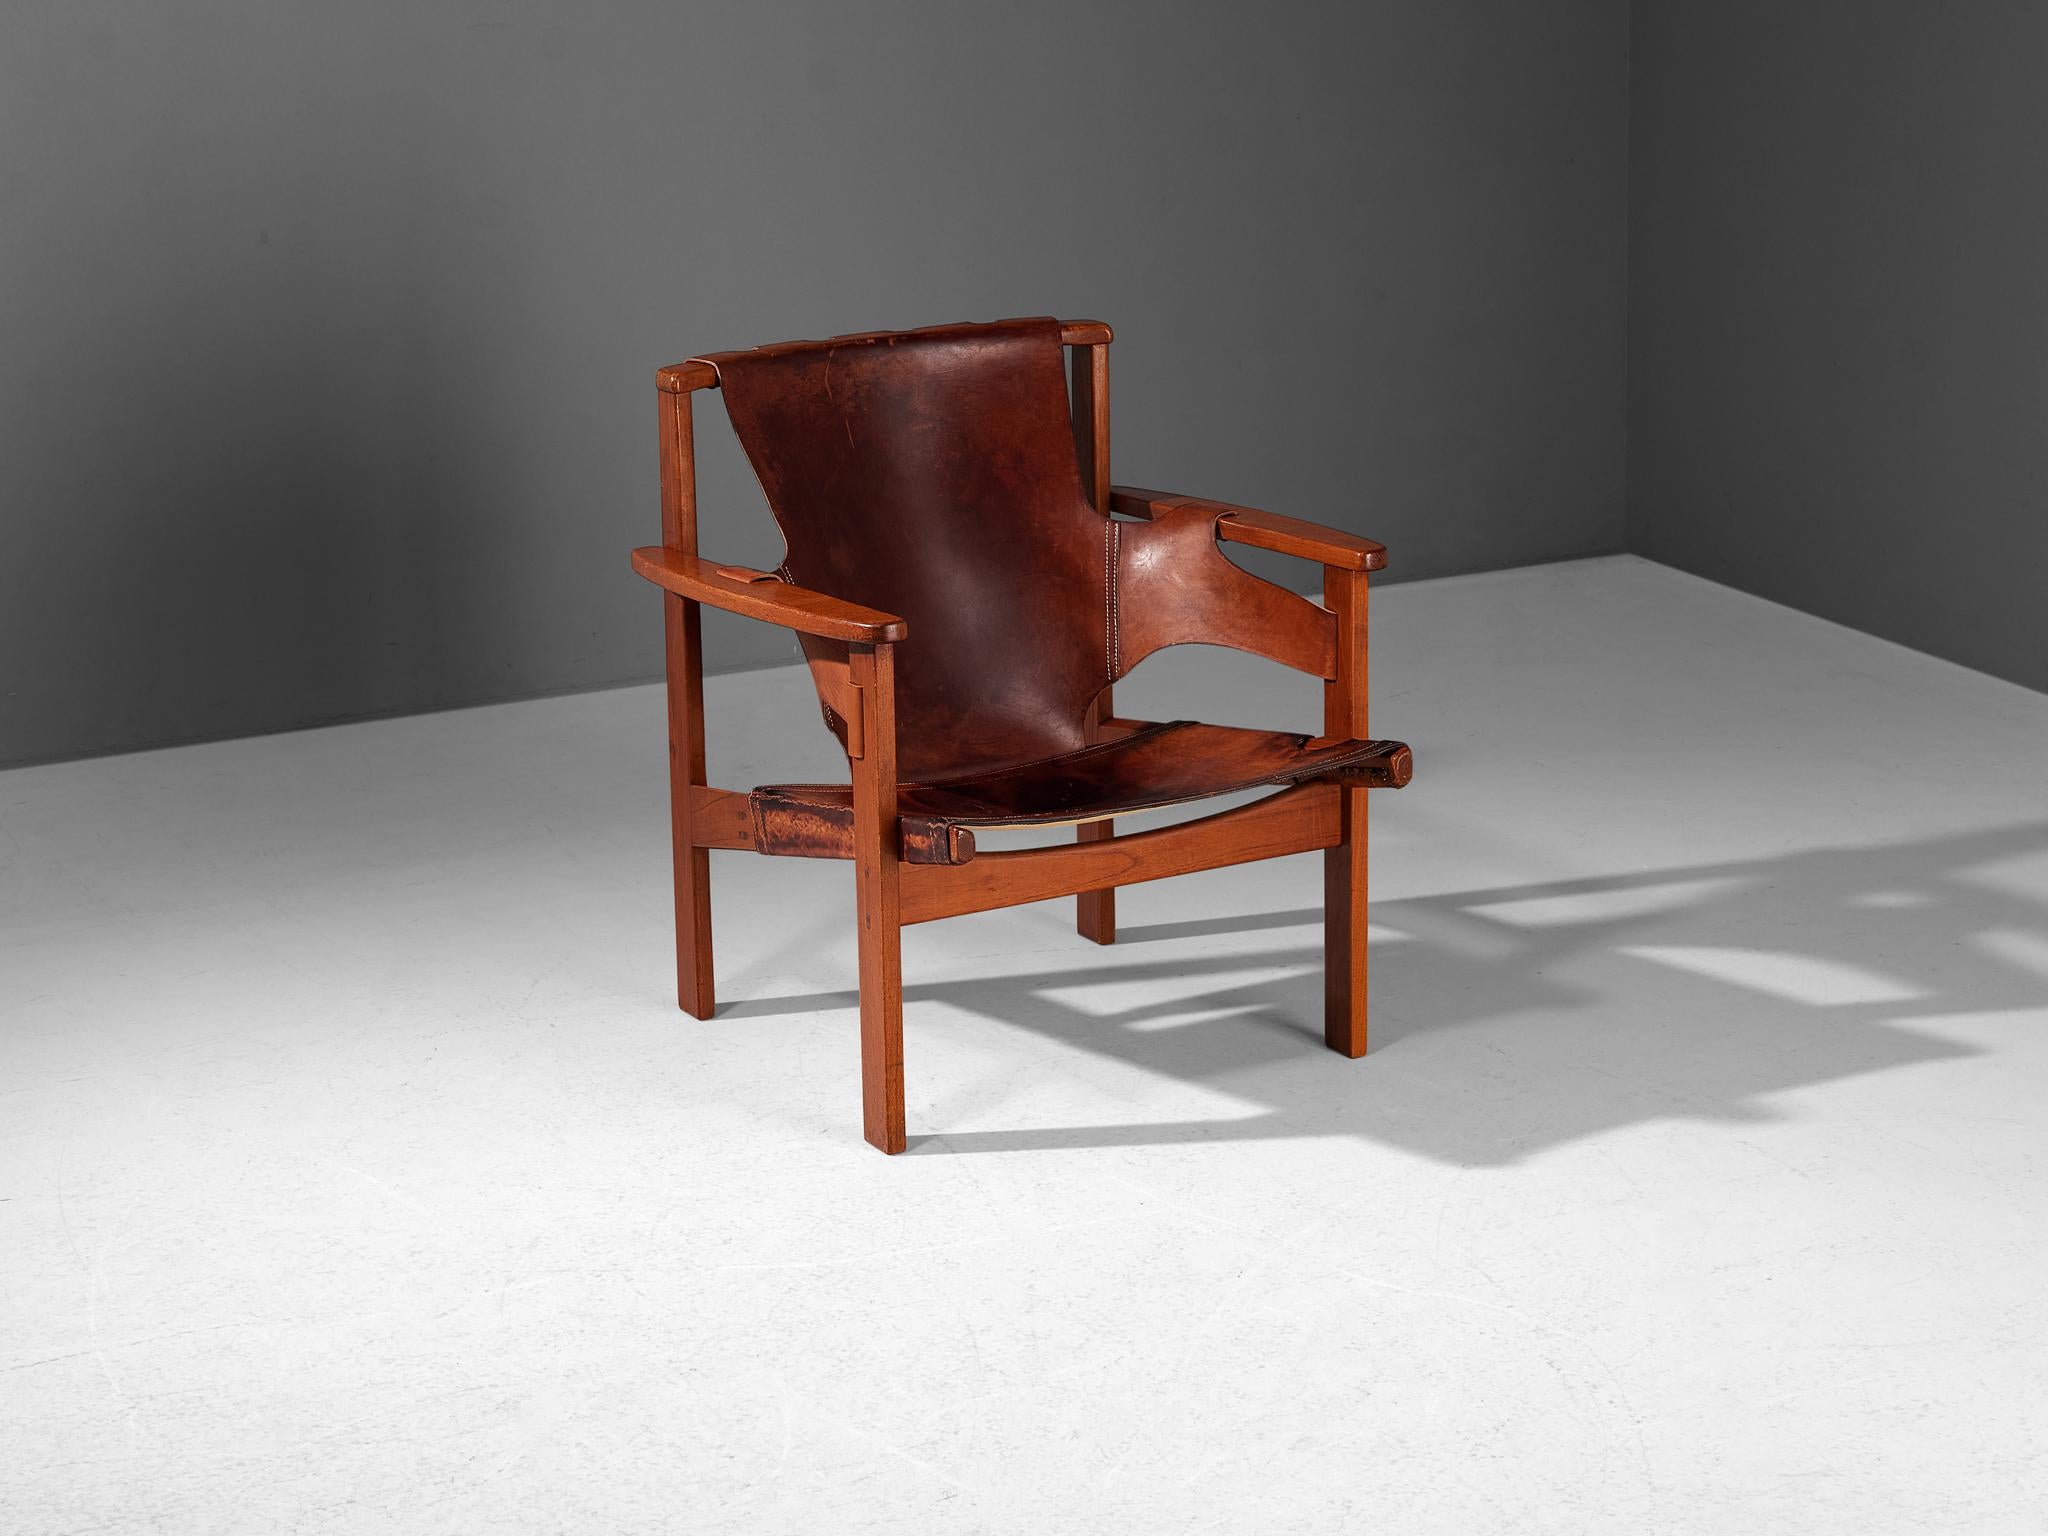 Carl-Axel Acking for Nordiska Kompaniet, lounge chair model ‘Trienna’, oak, leather, Sweden, designed in 1957

This characteristic lounge chair was designed by the Swedish architect and furniture designer Carl-Axel Acking in 1957. The chair’s name